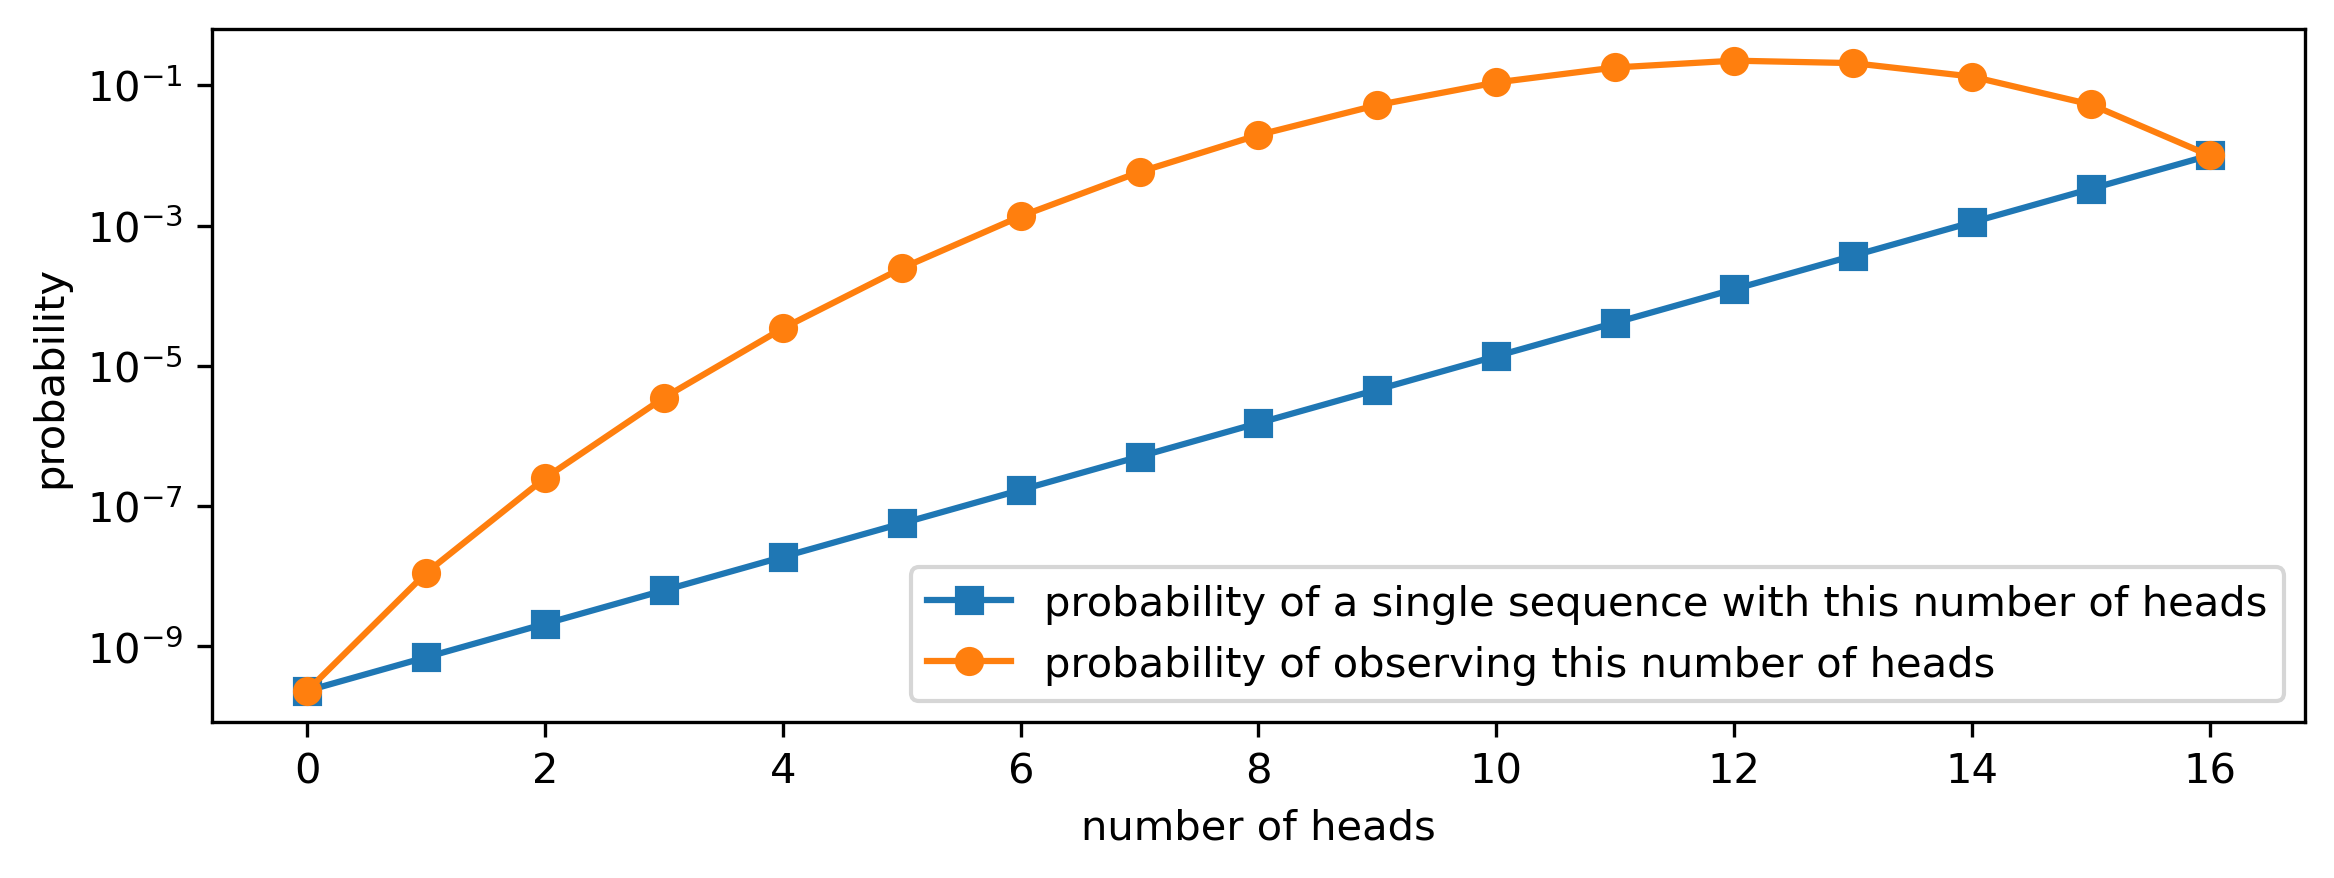 Probabilities of observing a particular sequence with a given number of heads, and of observing a given number of heads.